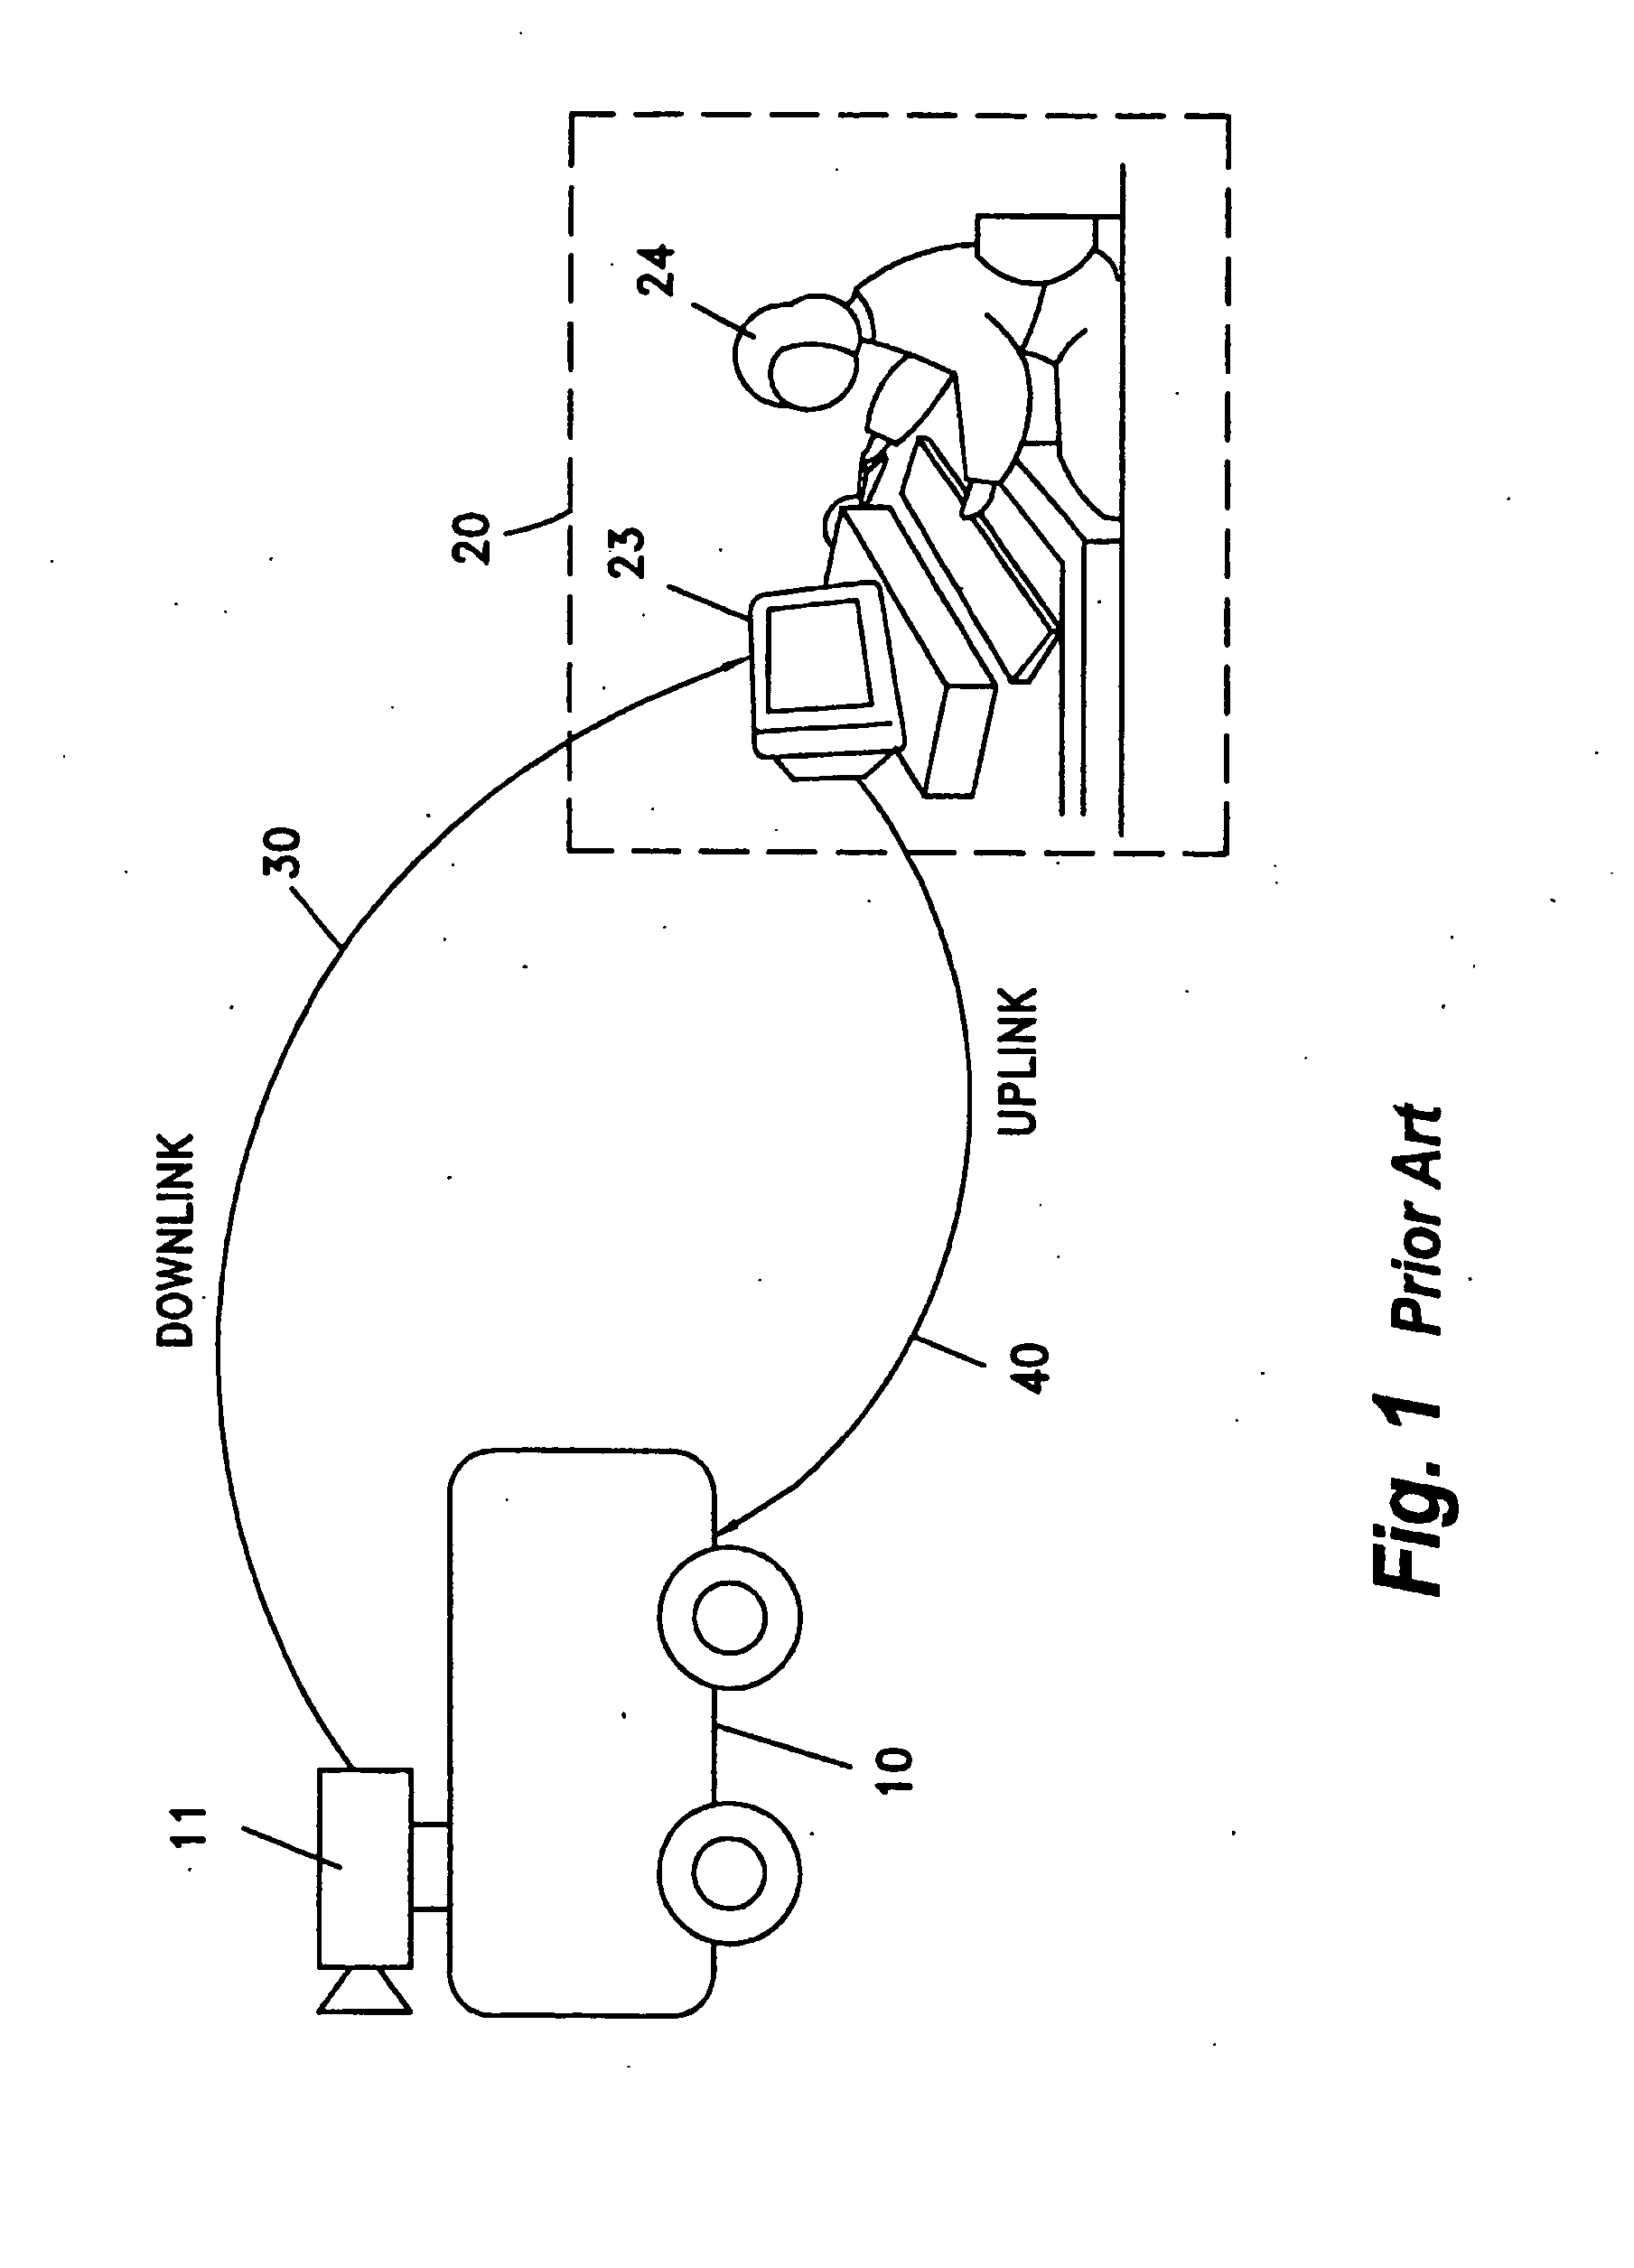 Method and system for guiding a remote vehicle via lagged communication channel